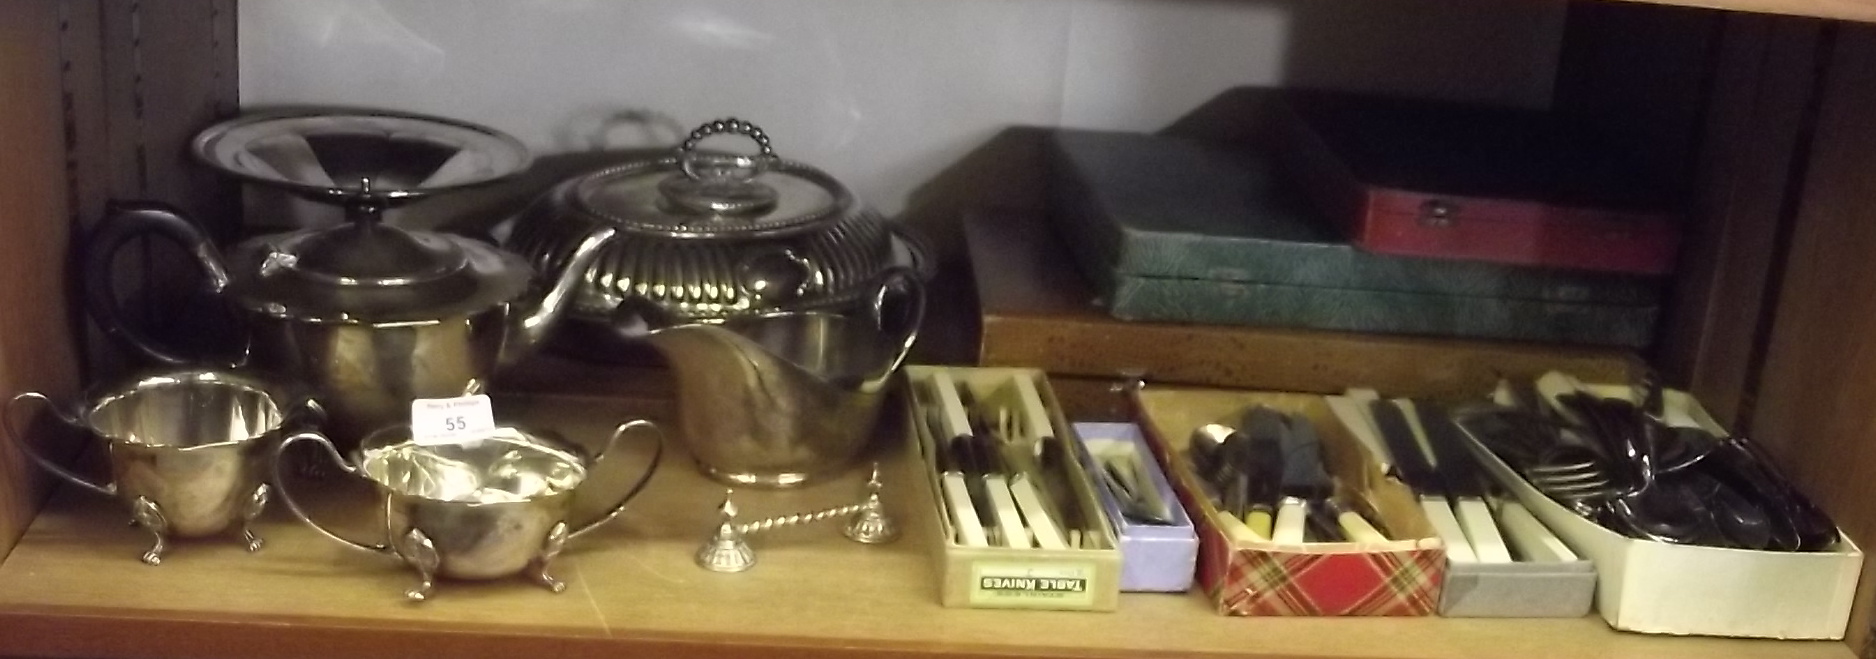 Silver Plated Tea Set and a Quantity of Cutlery Sets